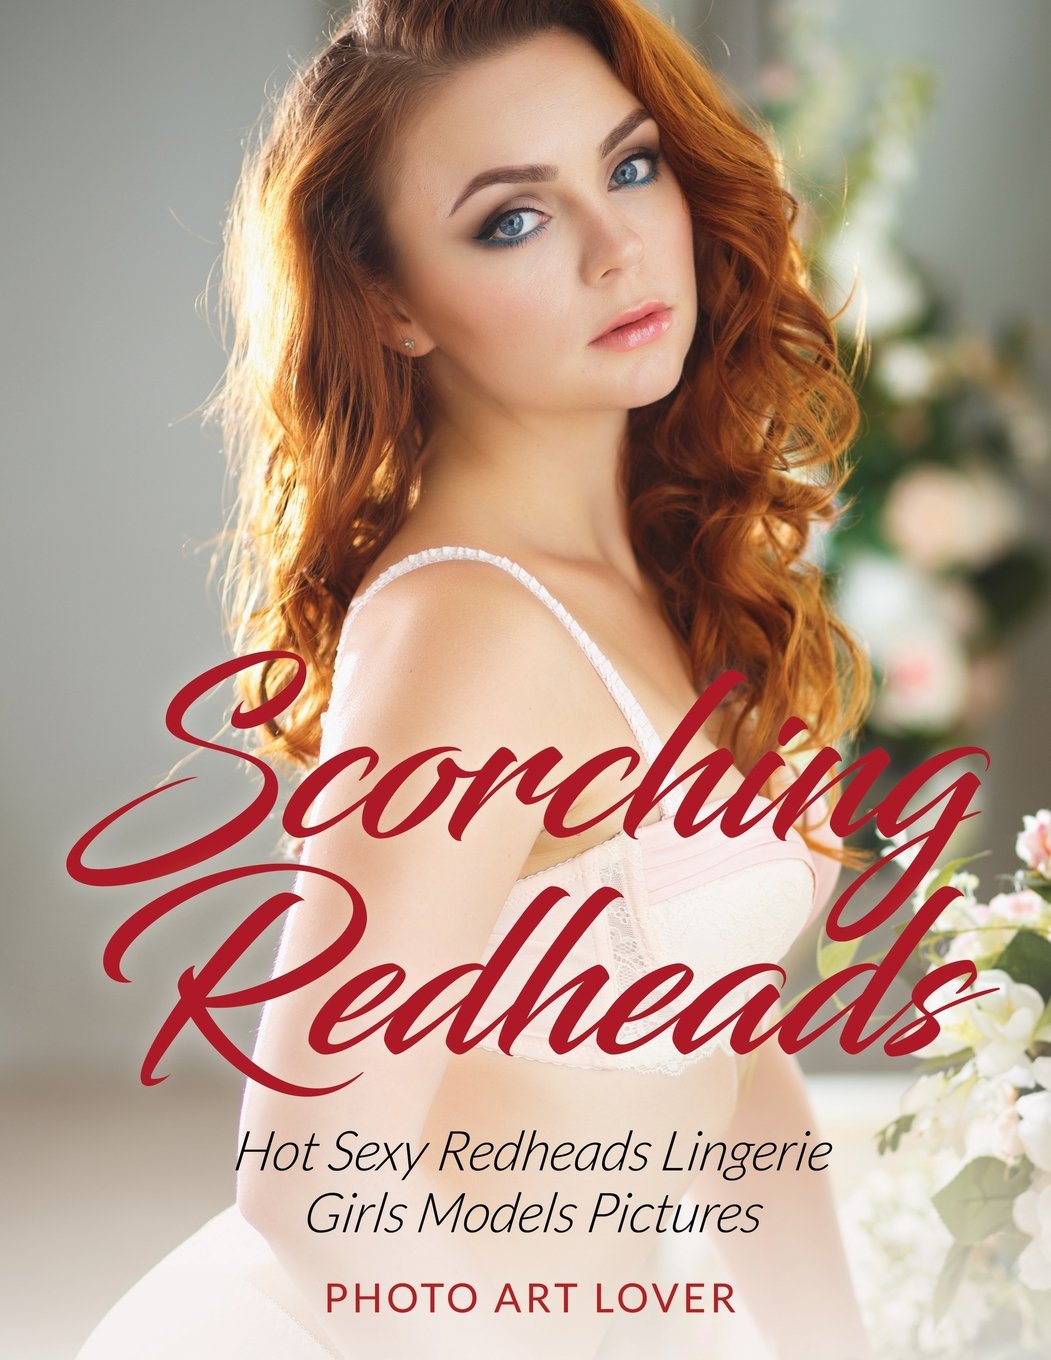 Preach reccomend naked and sexyredheads hot